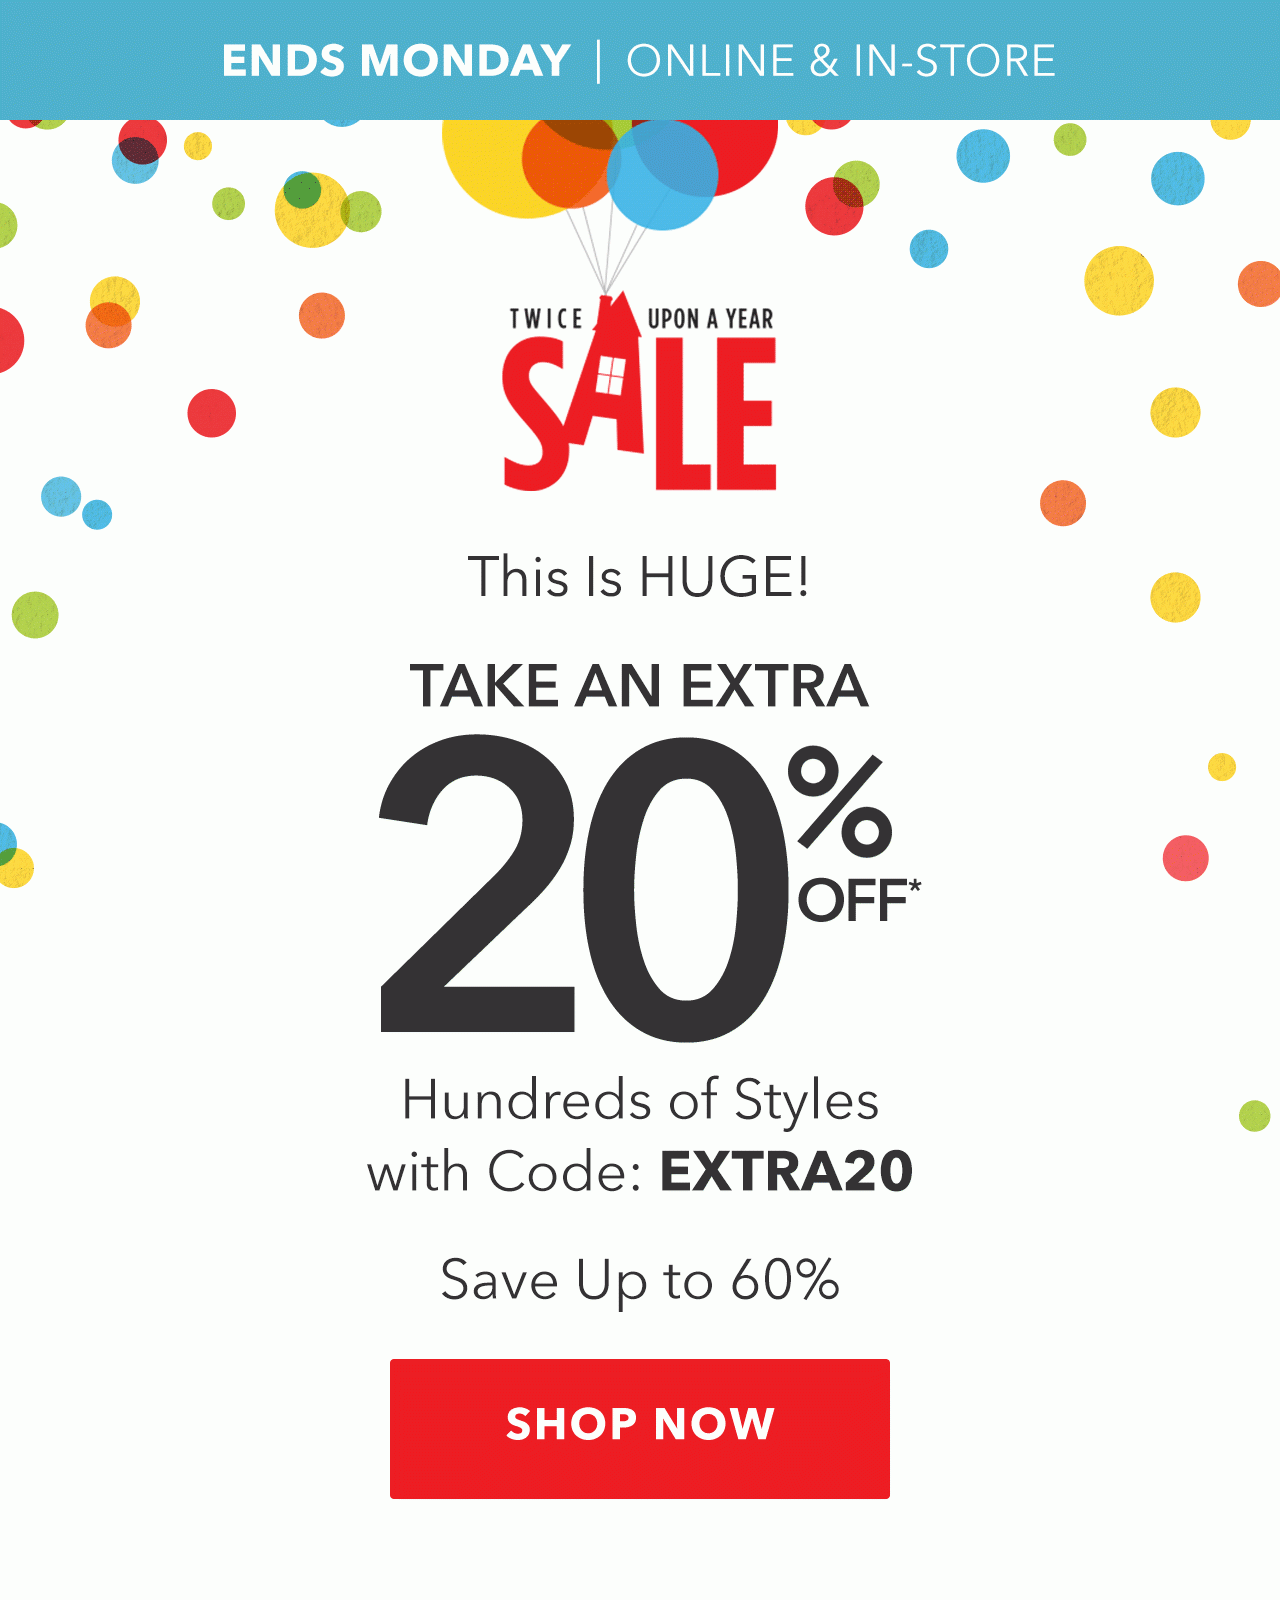 Take an Extra 20% Off* | Shop Now